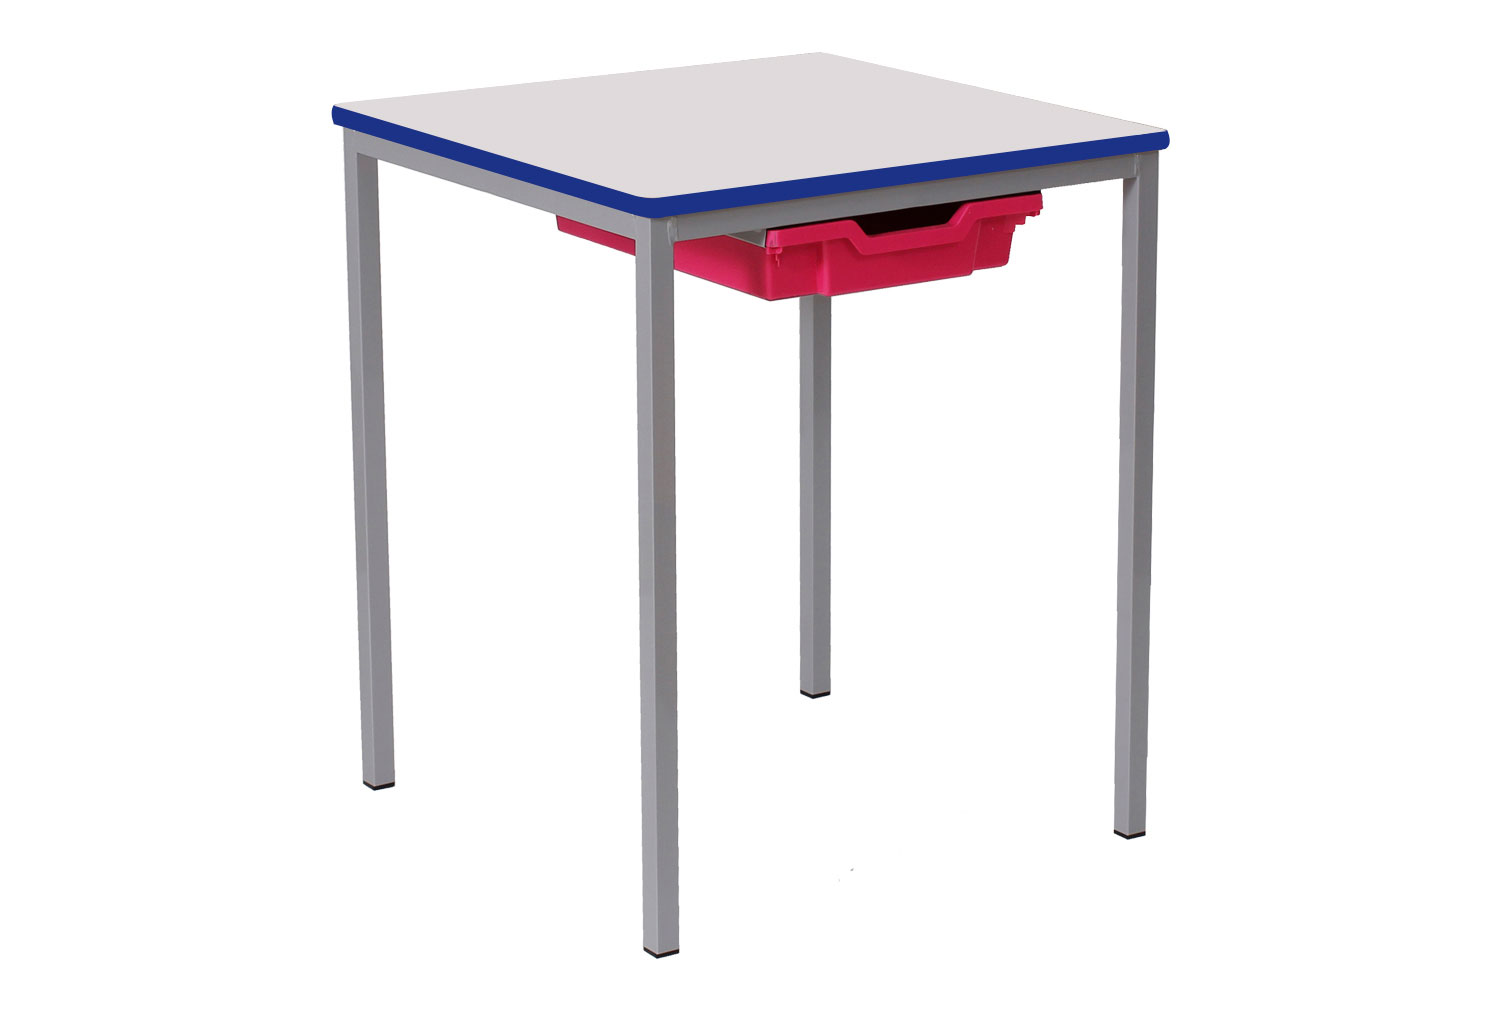 Qty 4 - Educate Student Square School Classroom Table with Tray 8-11 Years (PU Edge), 60wx60dx64h (cm), Silver Frame, Light Grey Top